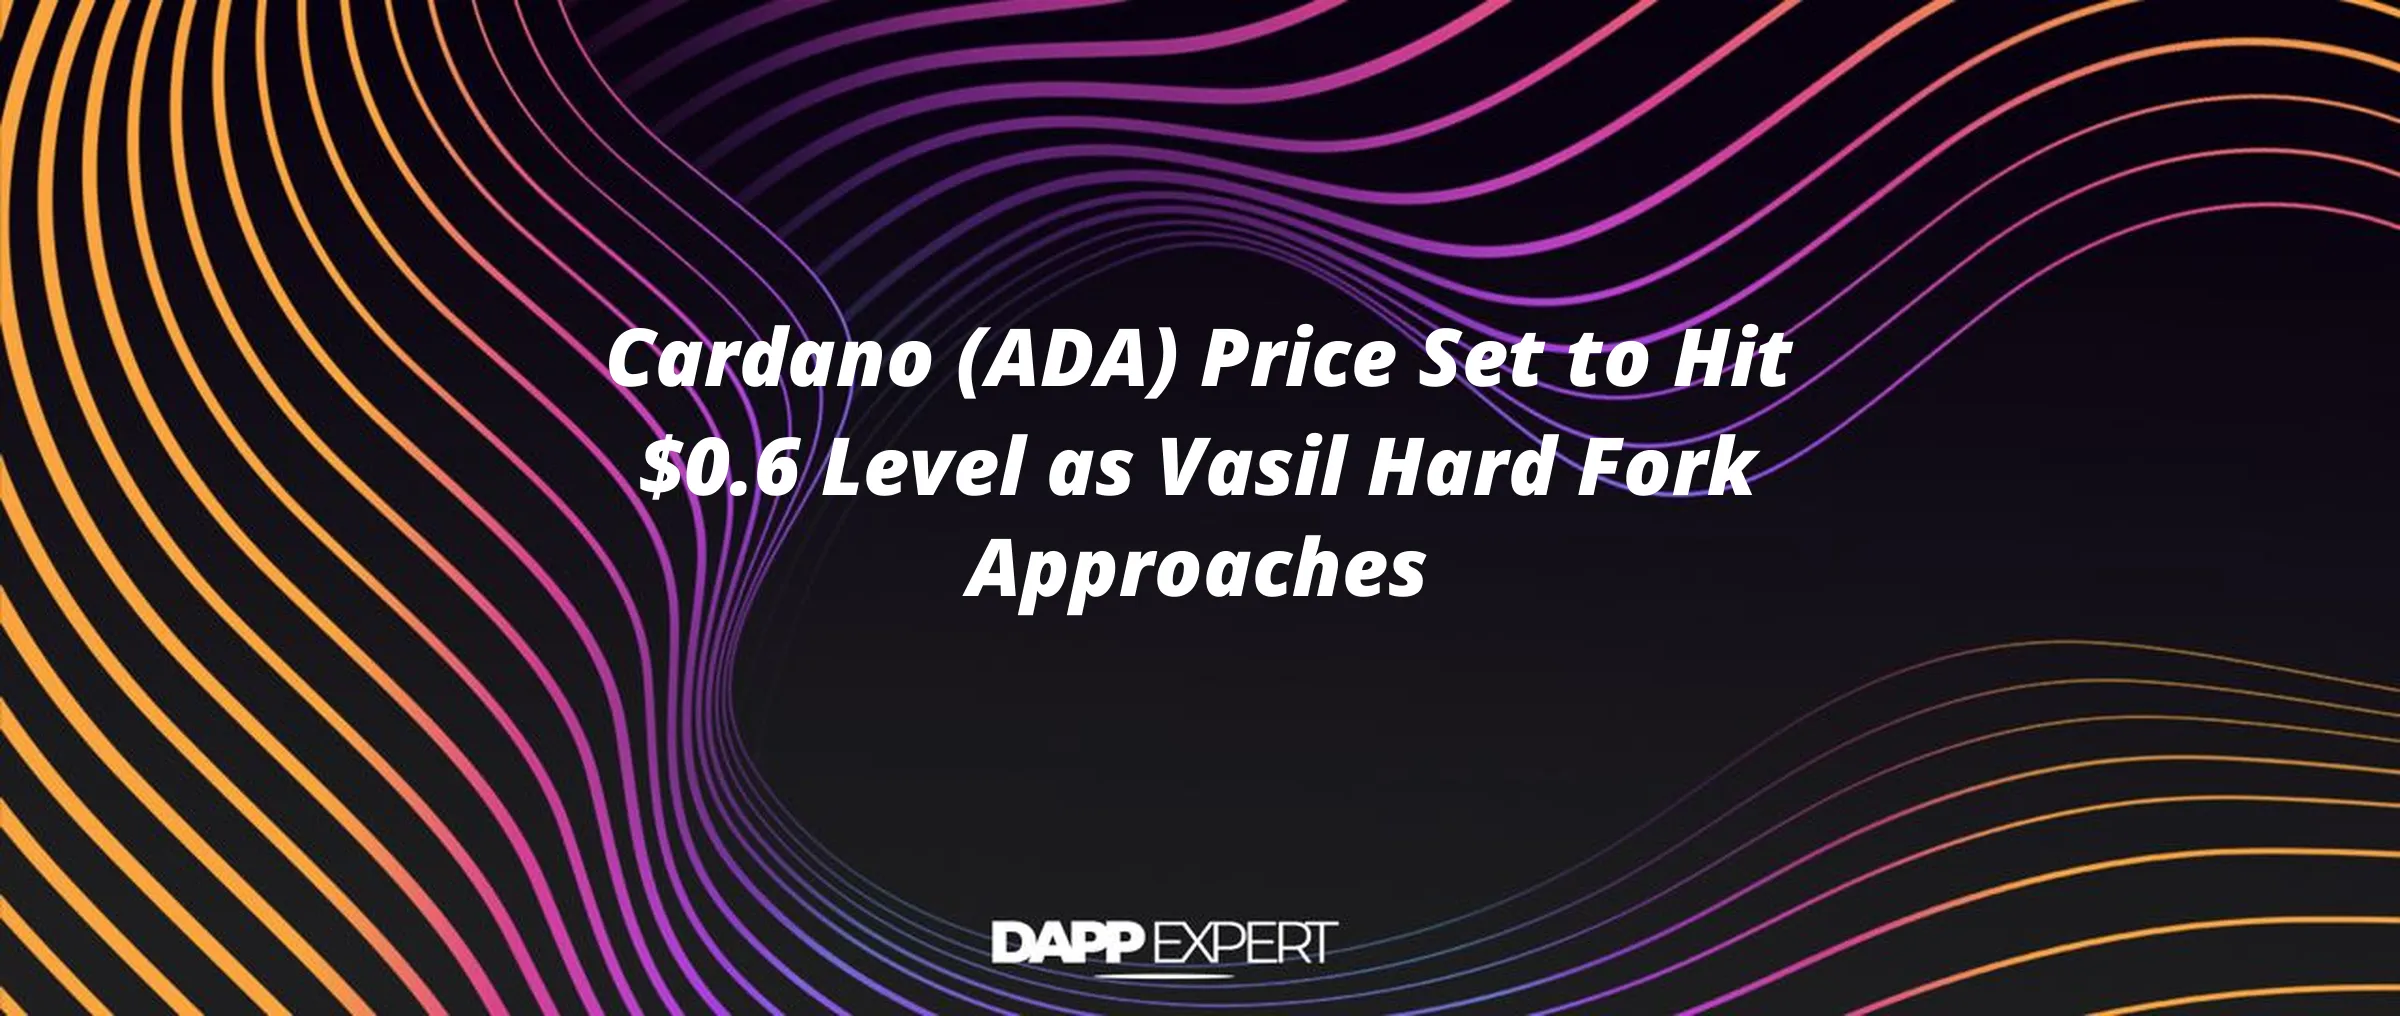 Cardano (ADA) Price Set to Hit $0.6 Level as Vasil Hard Fork Approaches